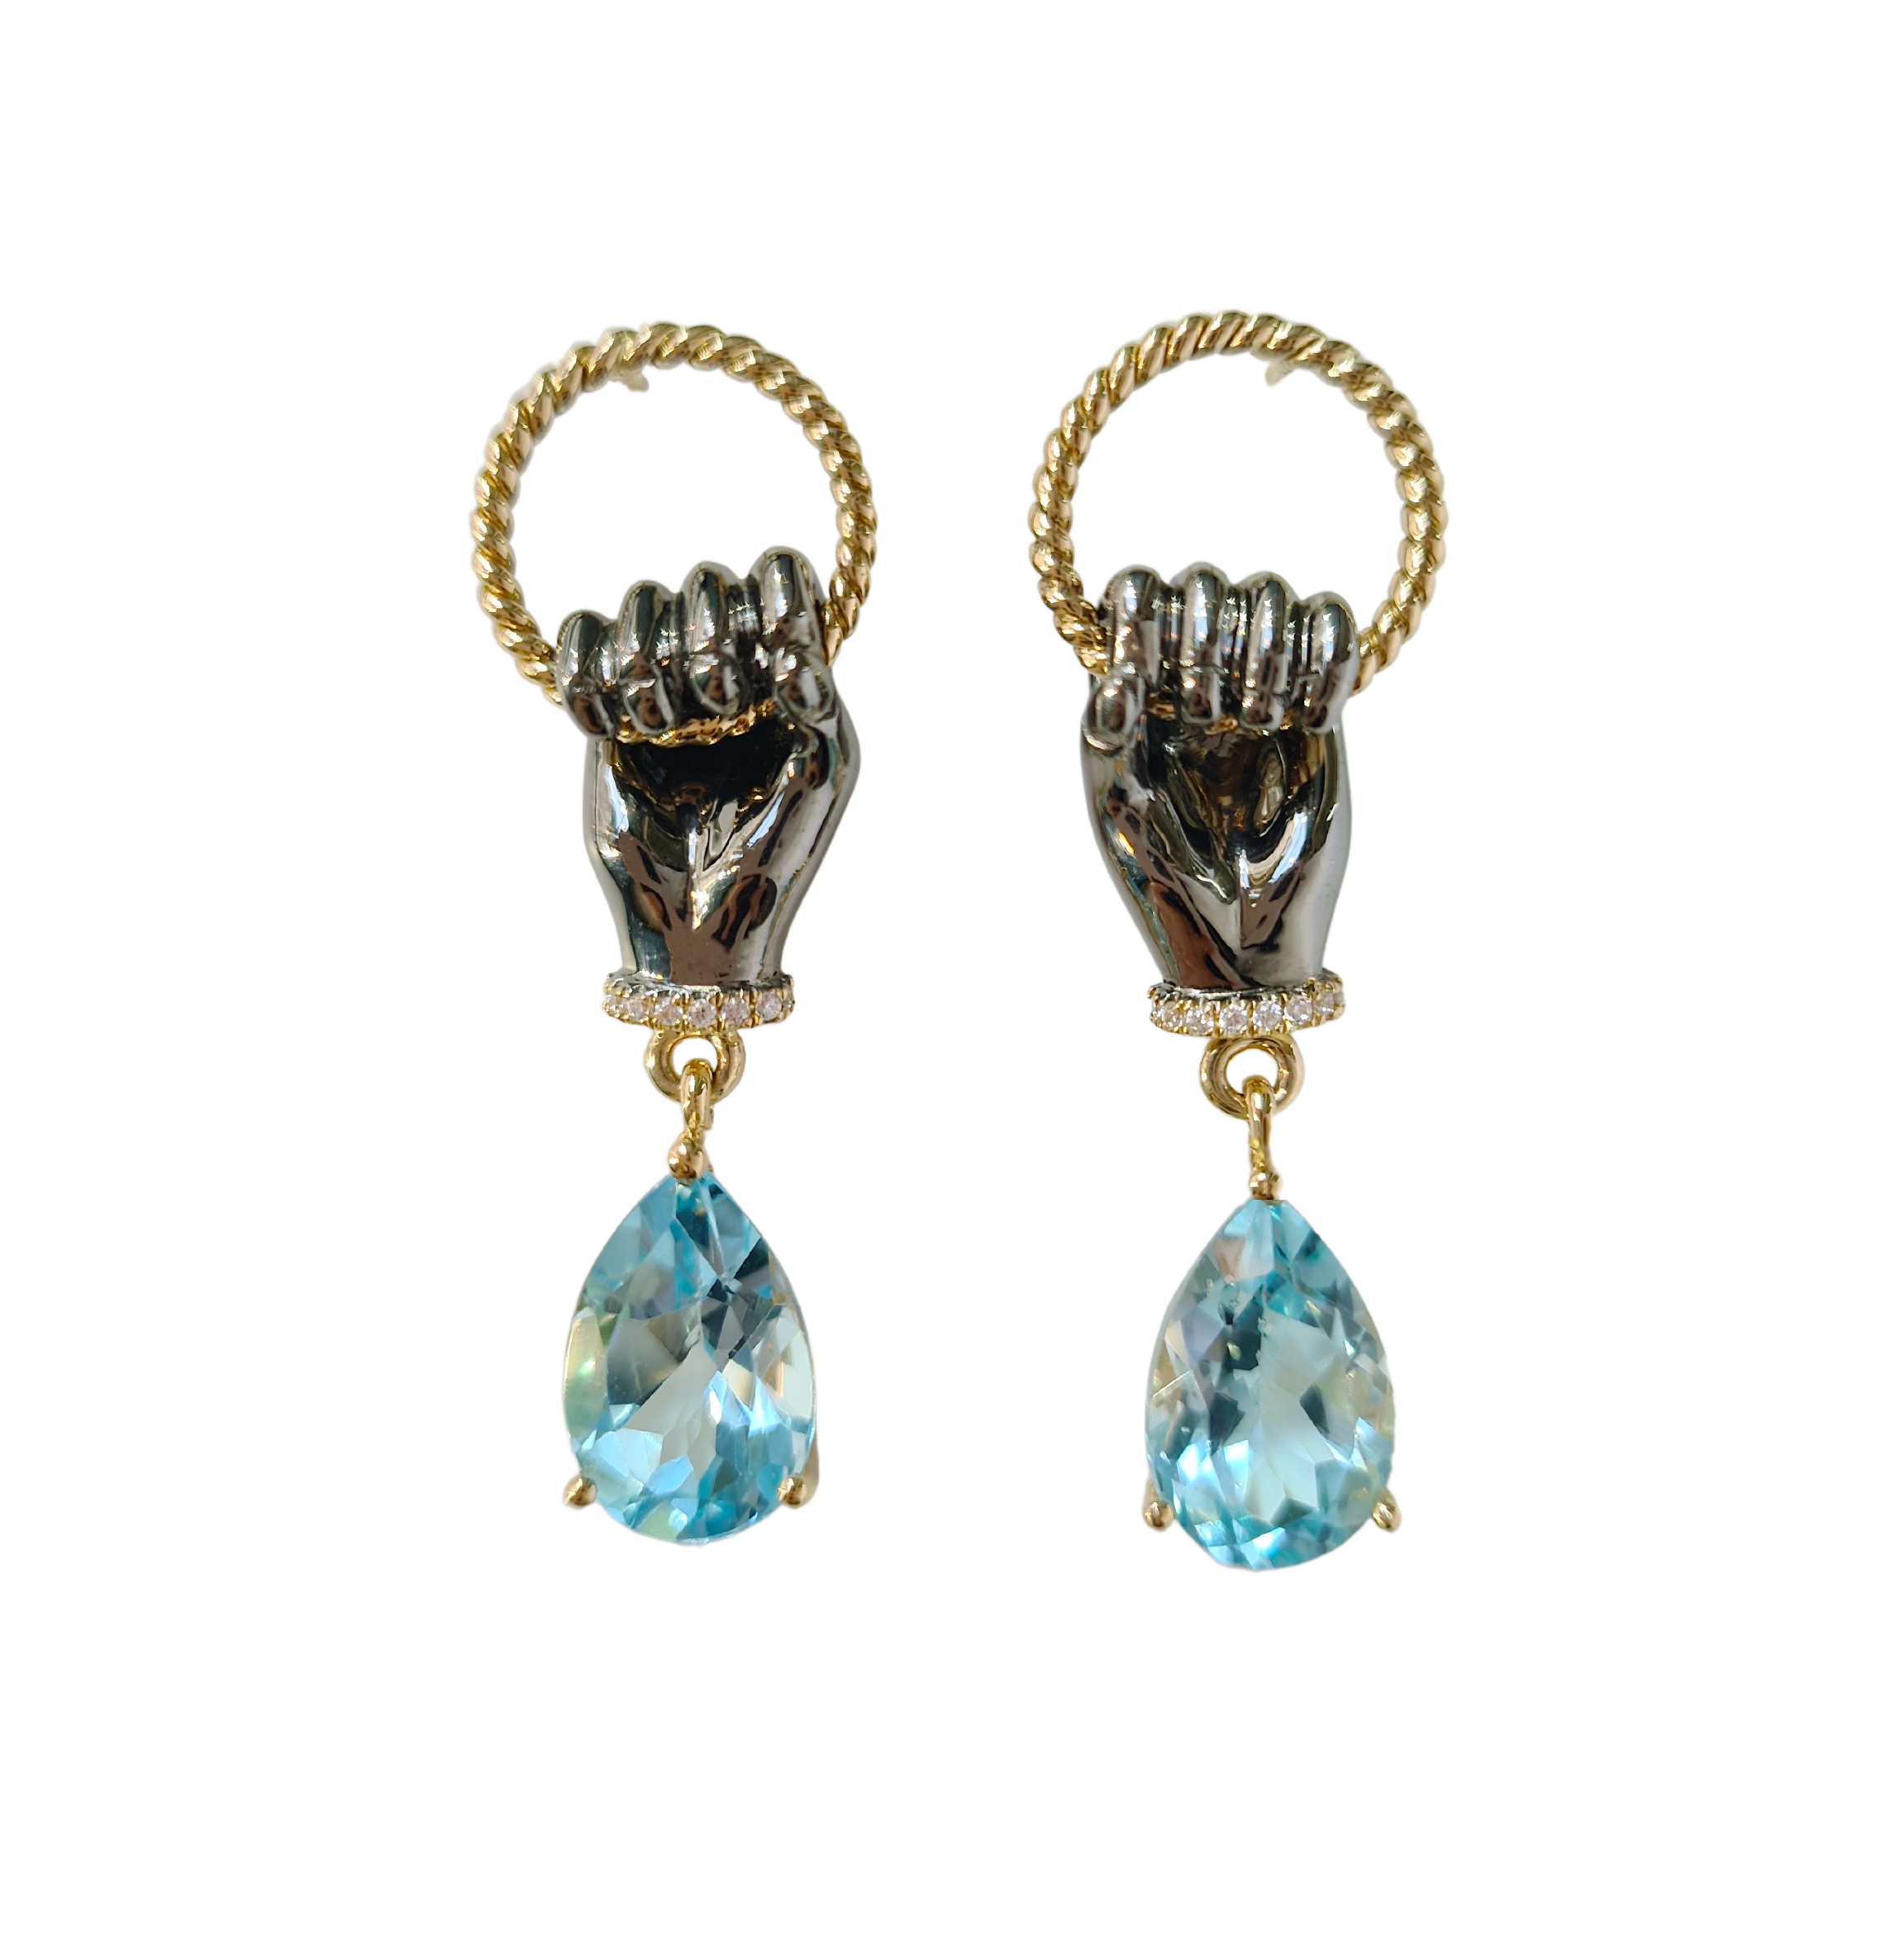 A pair of gold earrings. The earrings have 2 small hoops with hands held on and a blue topaz dangling from the wrists of the hand.